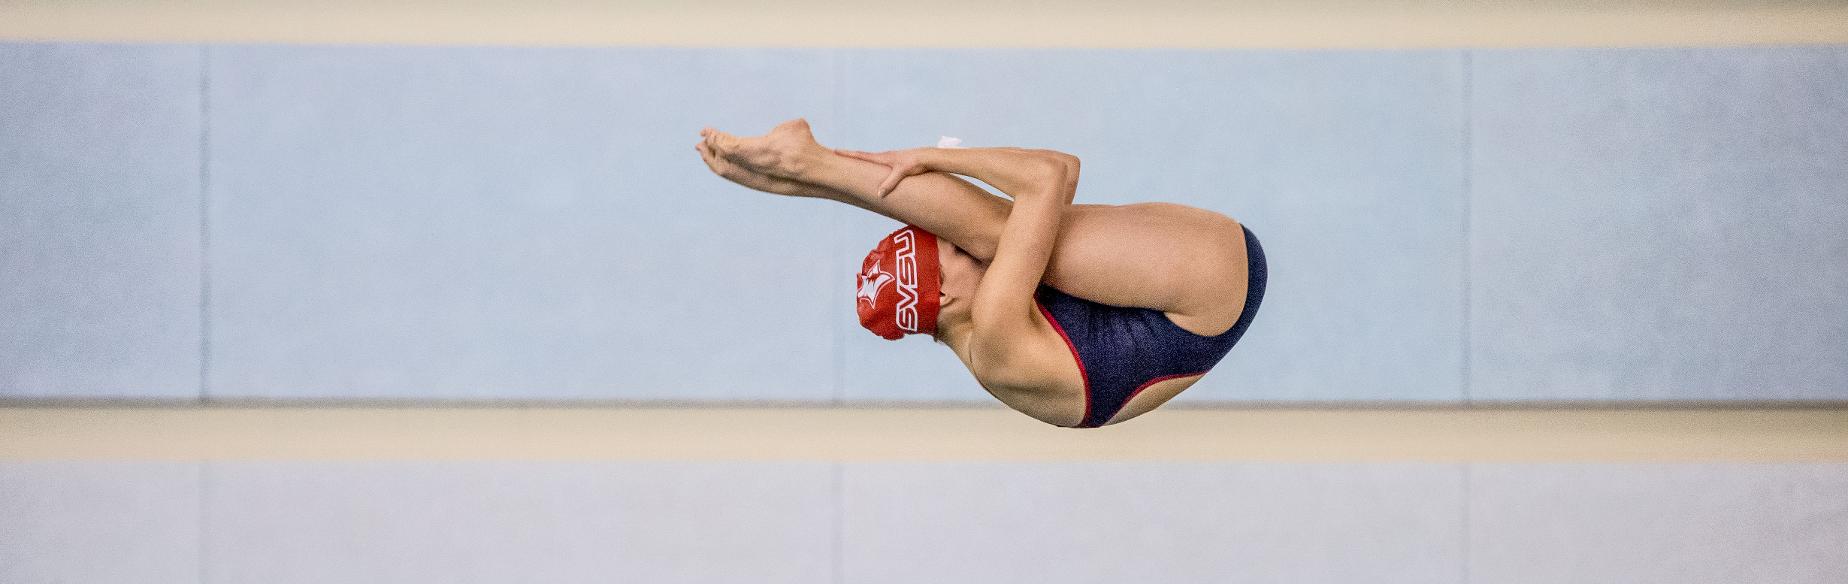 Murphy Competes in National Dive-in Meet